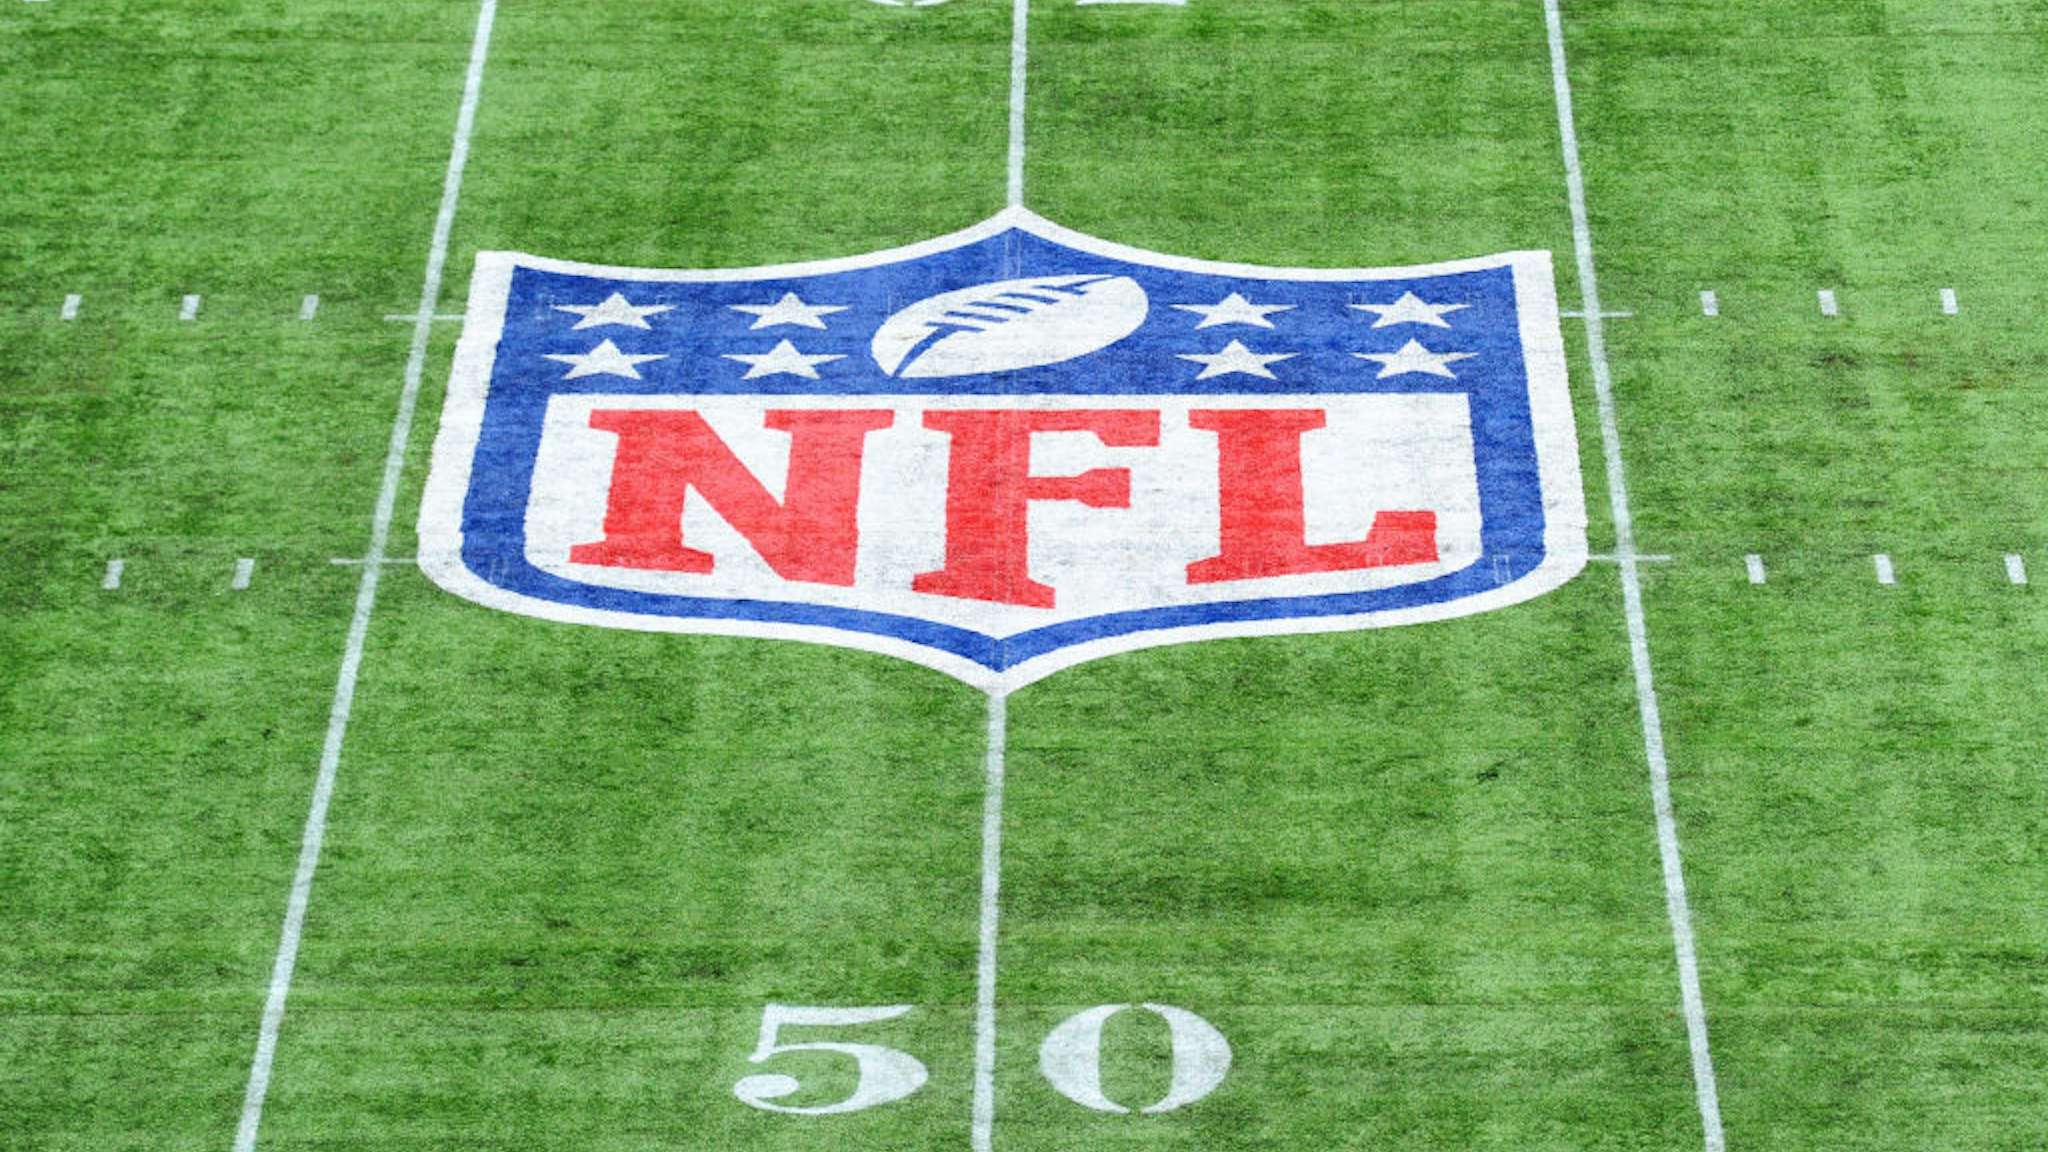 Detailed view of the NFL logo on the pitch during the NFL match between the Carolina Panthers and Tampa Bay Buccaneers at Tottenham Hotspur Stadium on October 13, 2019 in London, England.